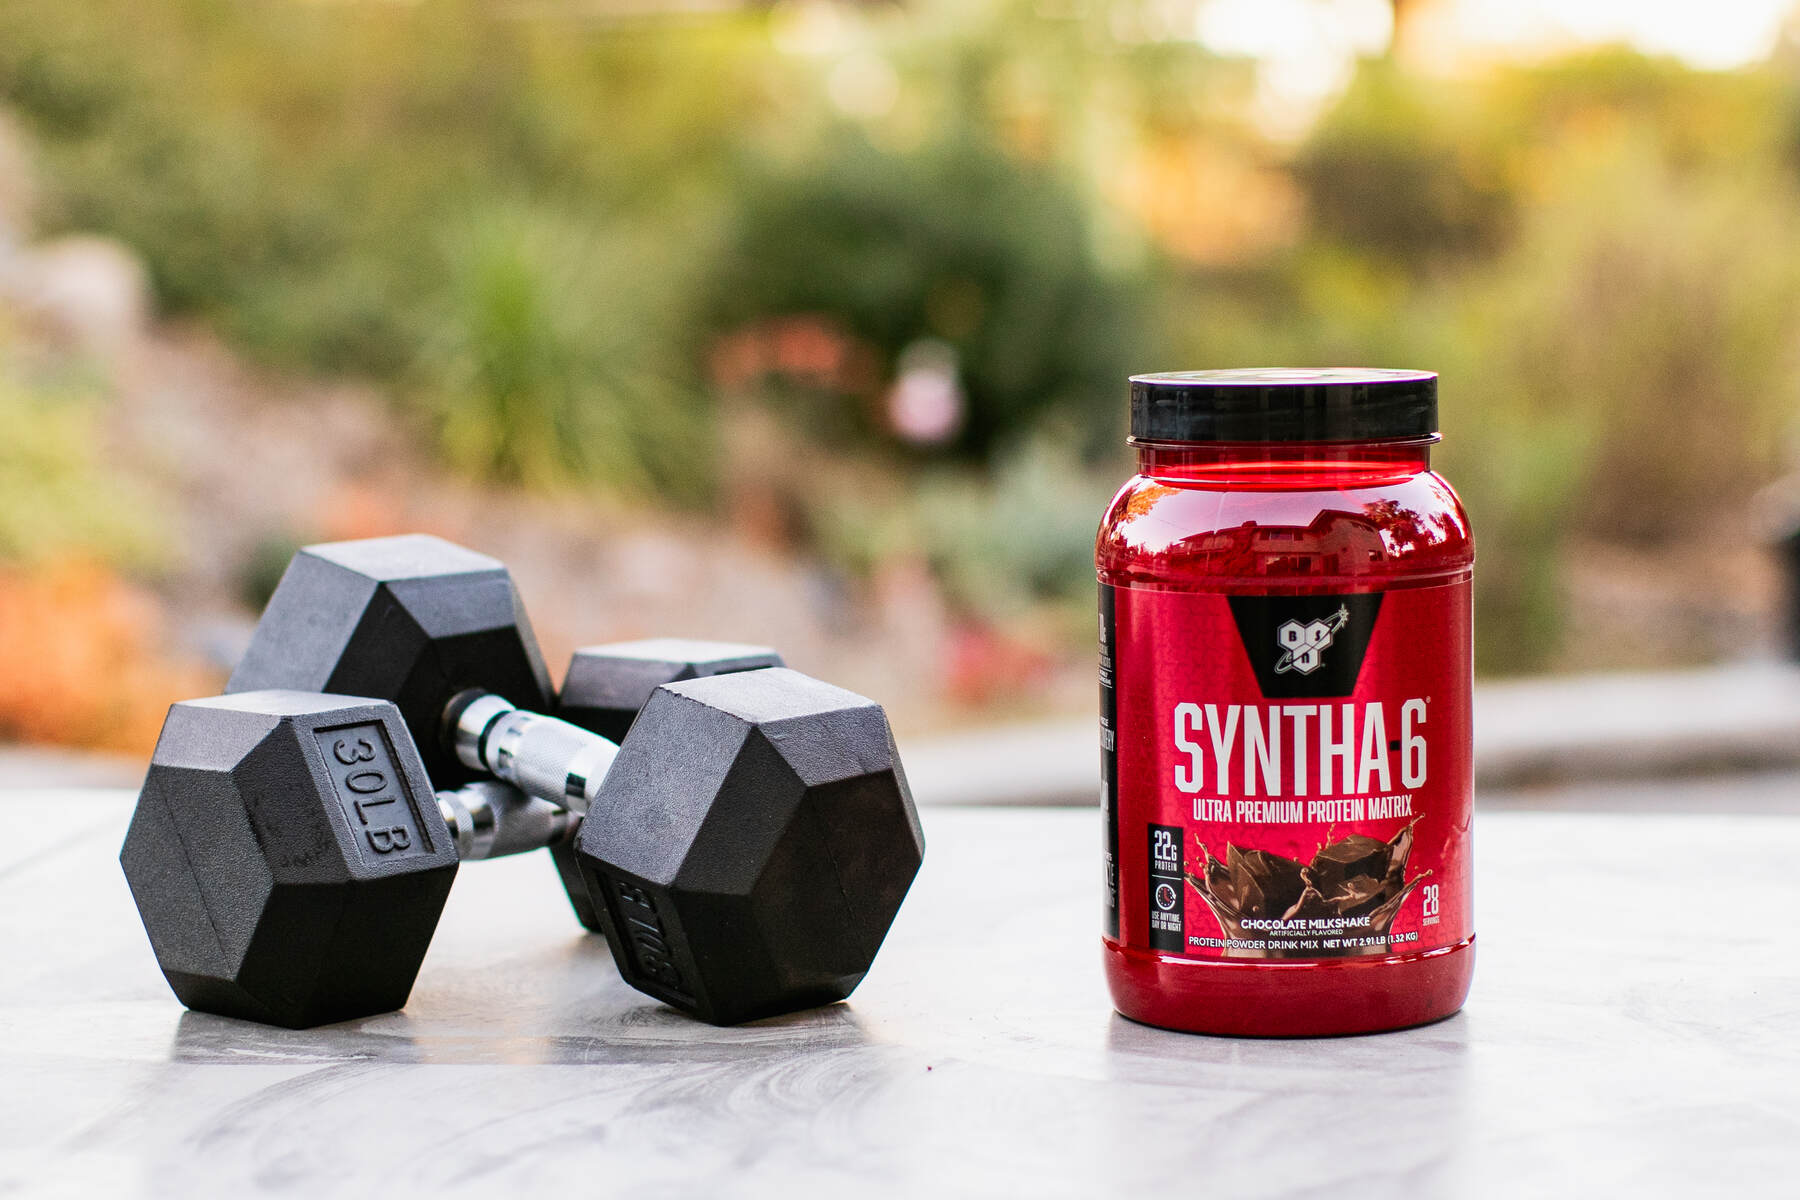 A black dumbbell and a red jar of protein powder on an outdoor marble surface with plants in the background